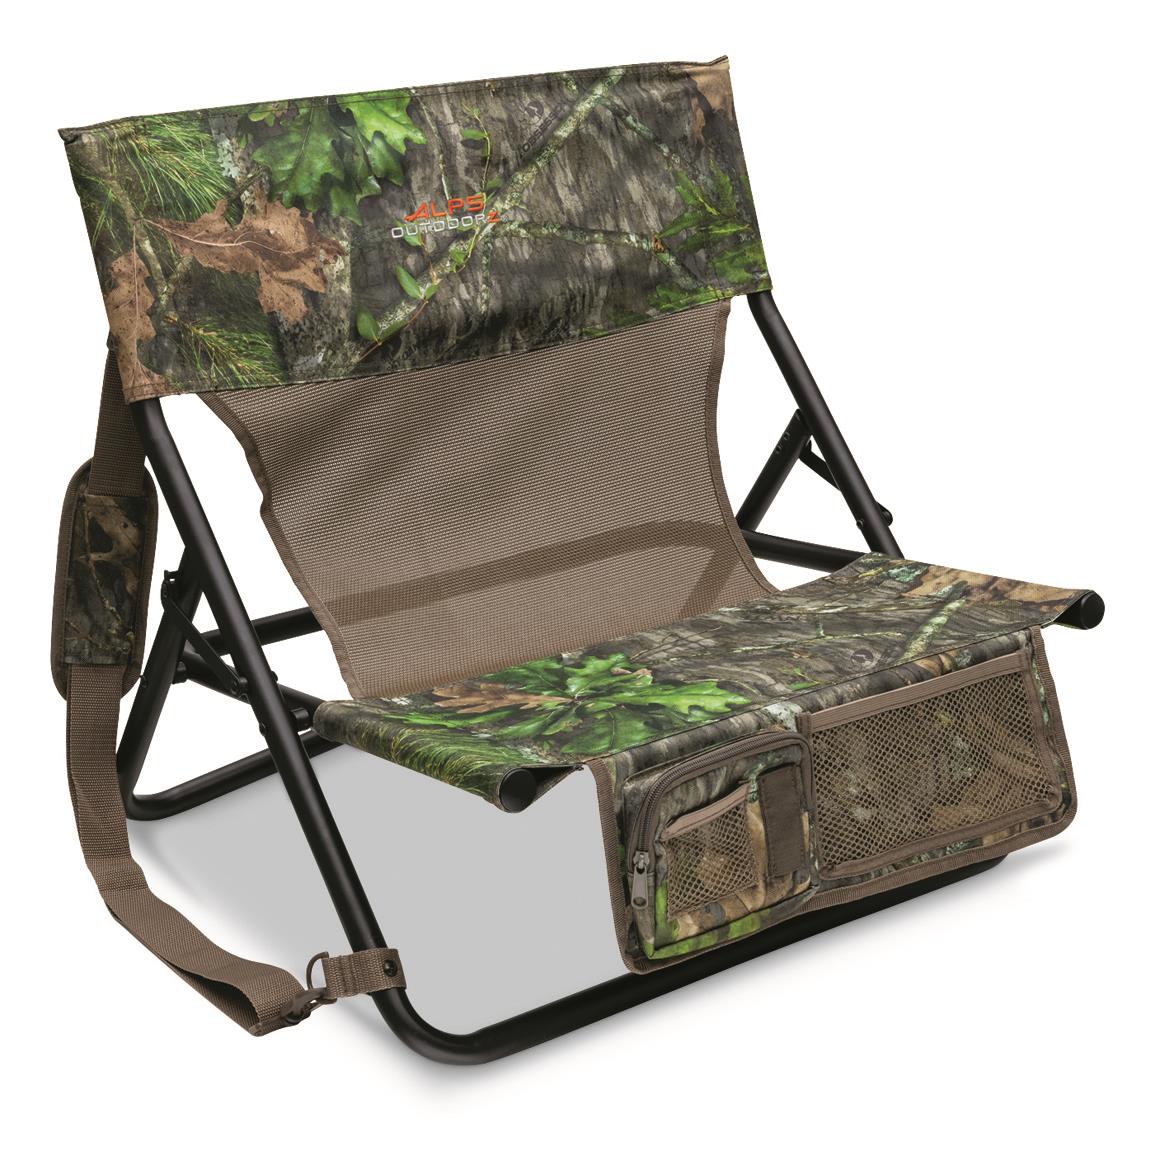 HME Folding Stadium Seat - 711679, Stools, Chairs & Seat Cushions at  Sportsman's Guide